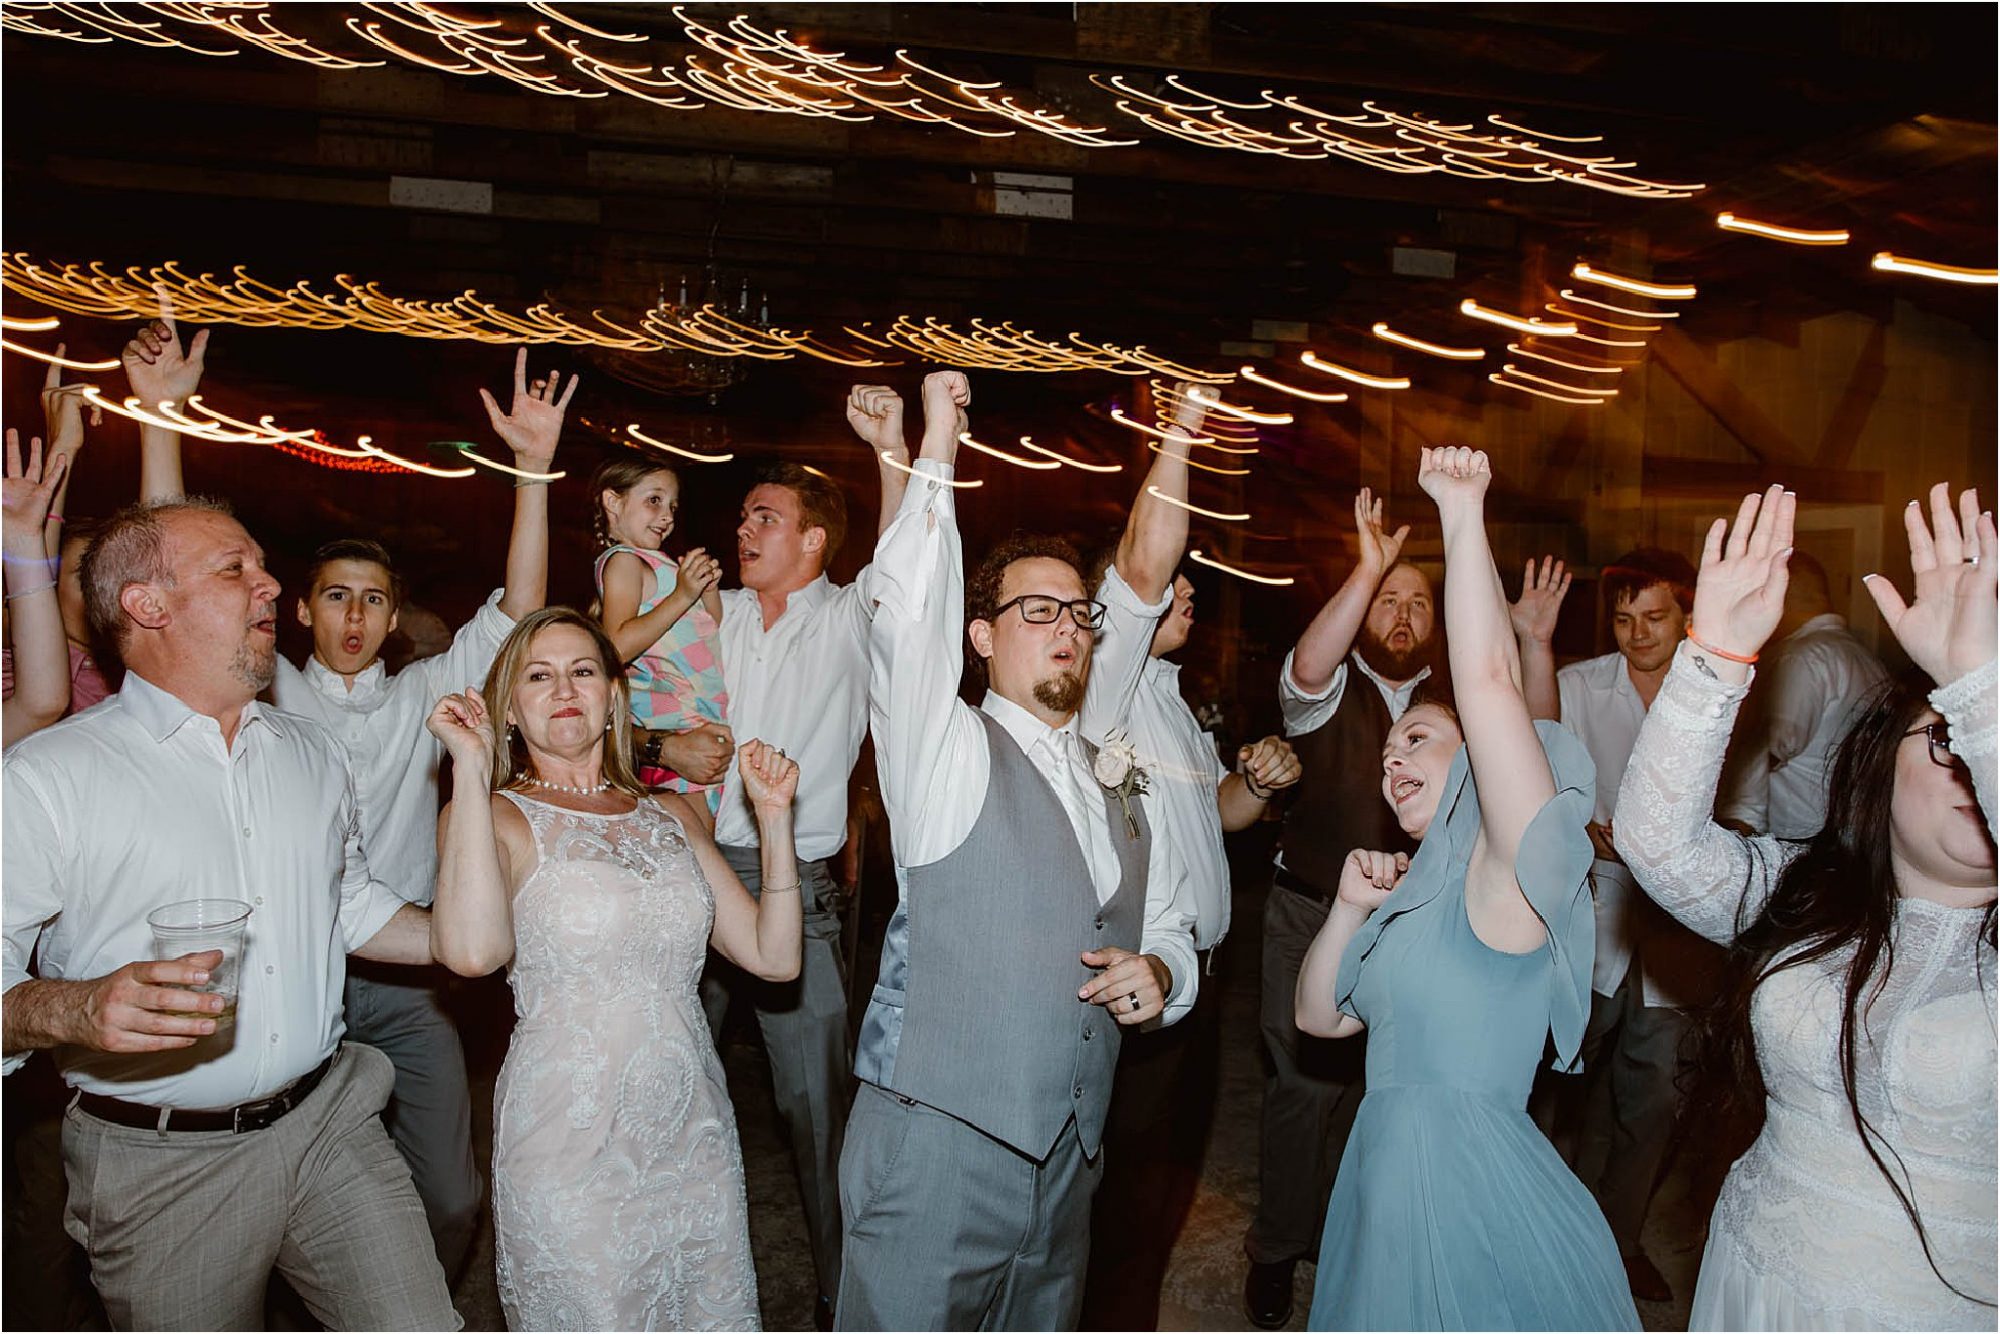 groom dancing with guests at wedding reception